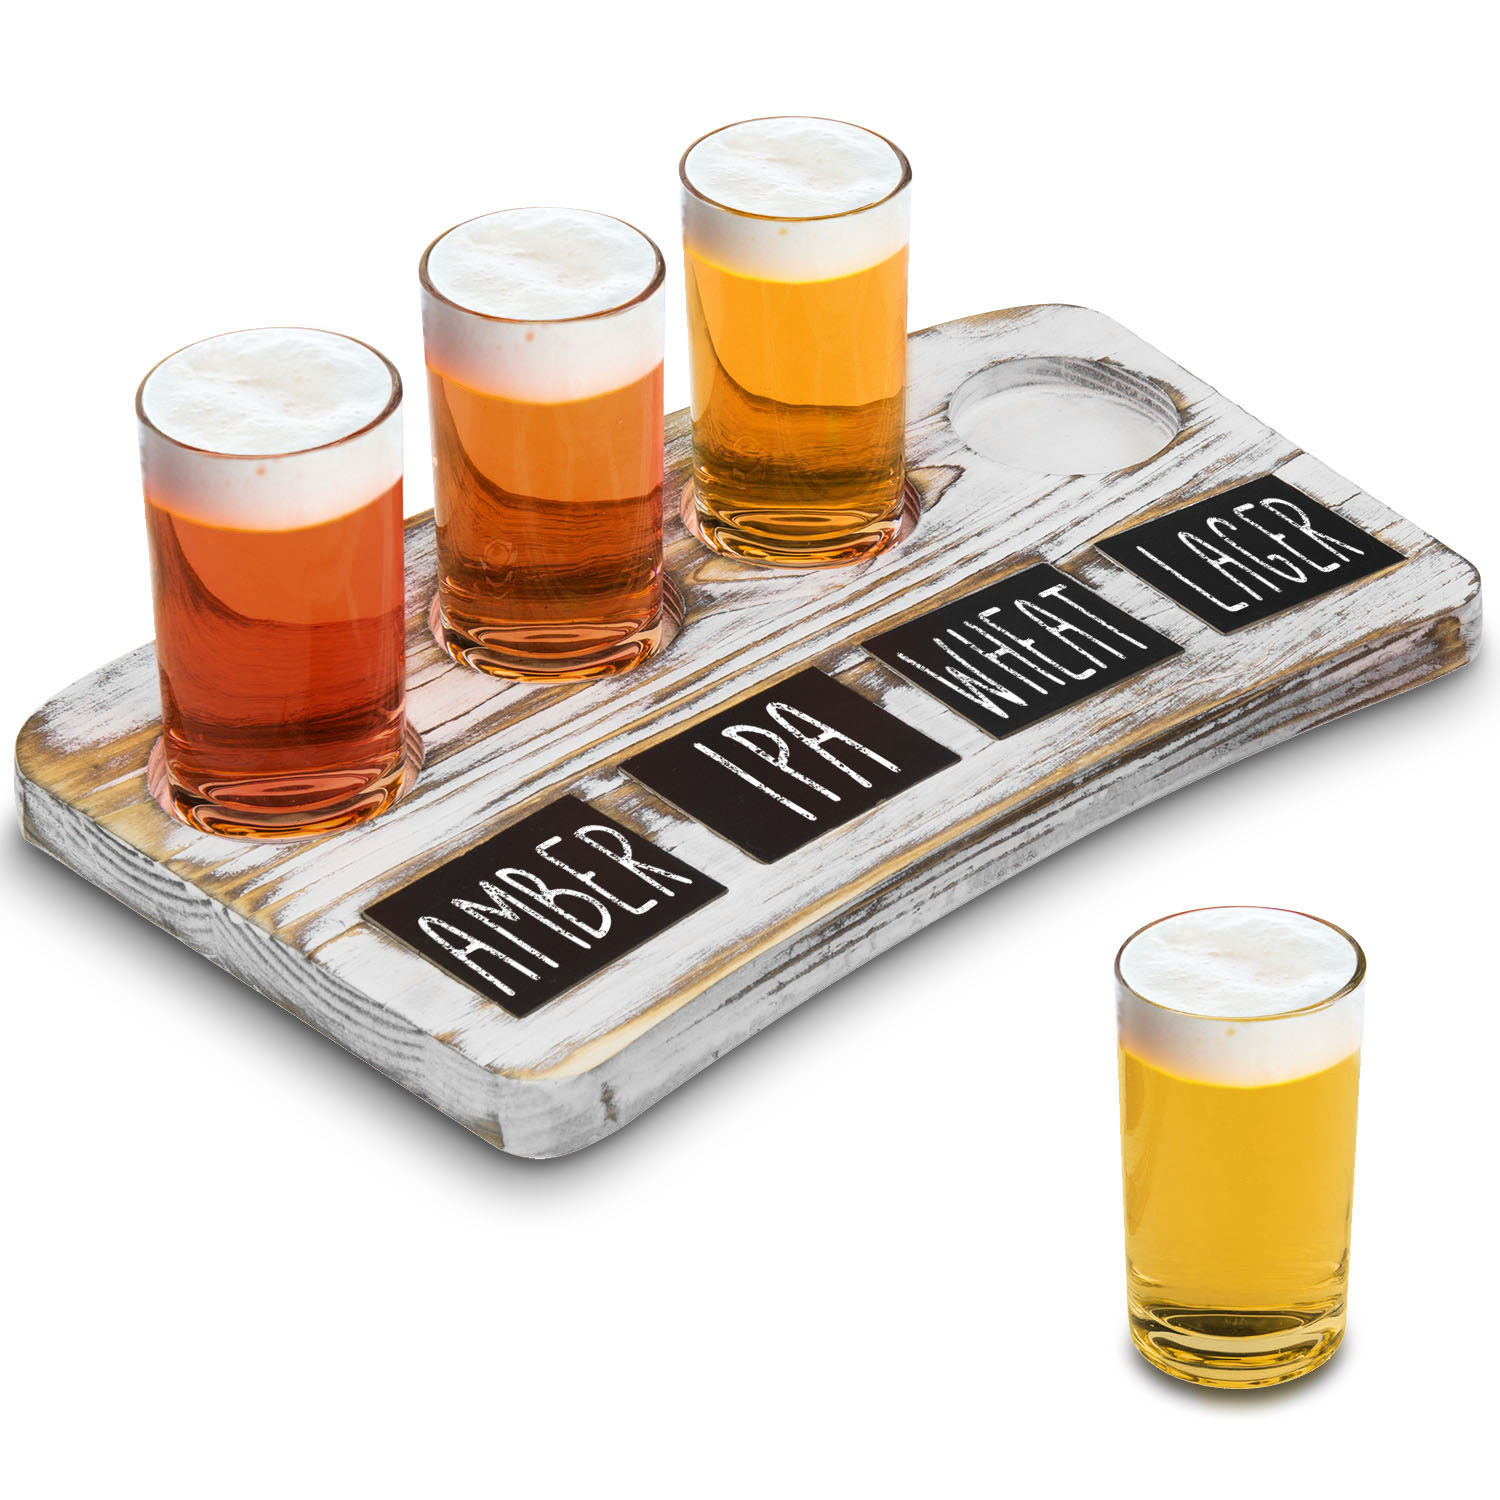 MyGift 4-Glass Whitewashed Wood Beer Flight Sampler Serving Tray with Chalkboard Labels - image 1 of 7